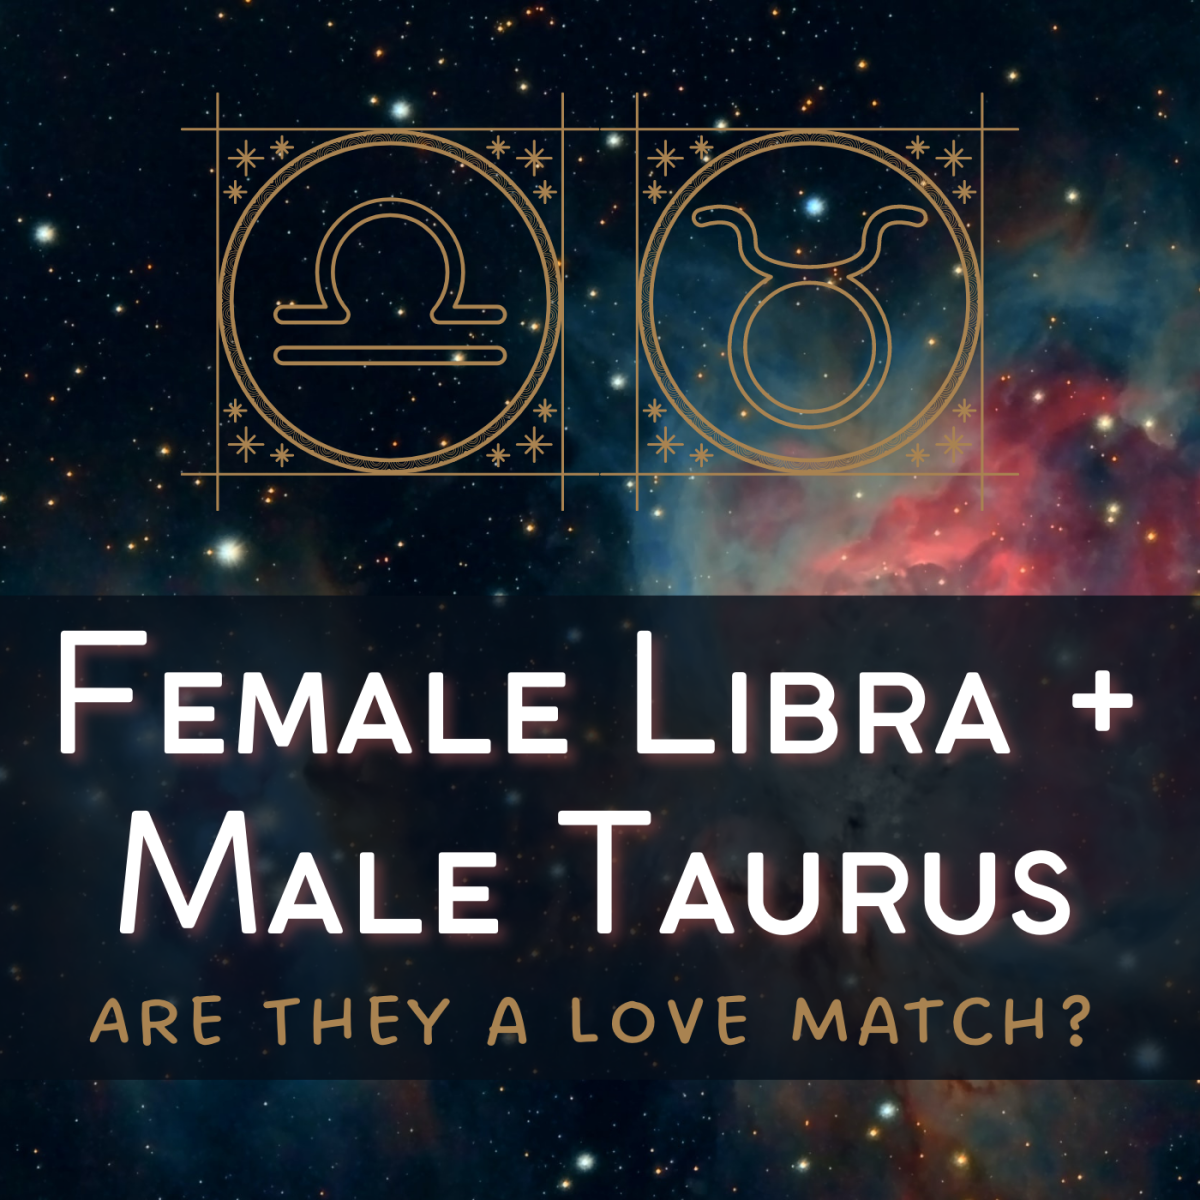 What happens when the bull meets the scales? Explore the attraction between a Libra woman and a Taurus man.